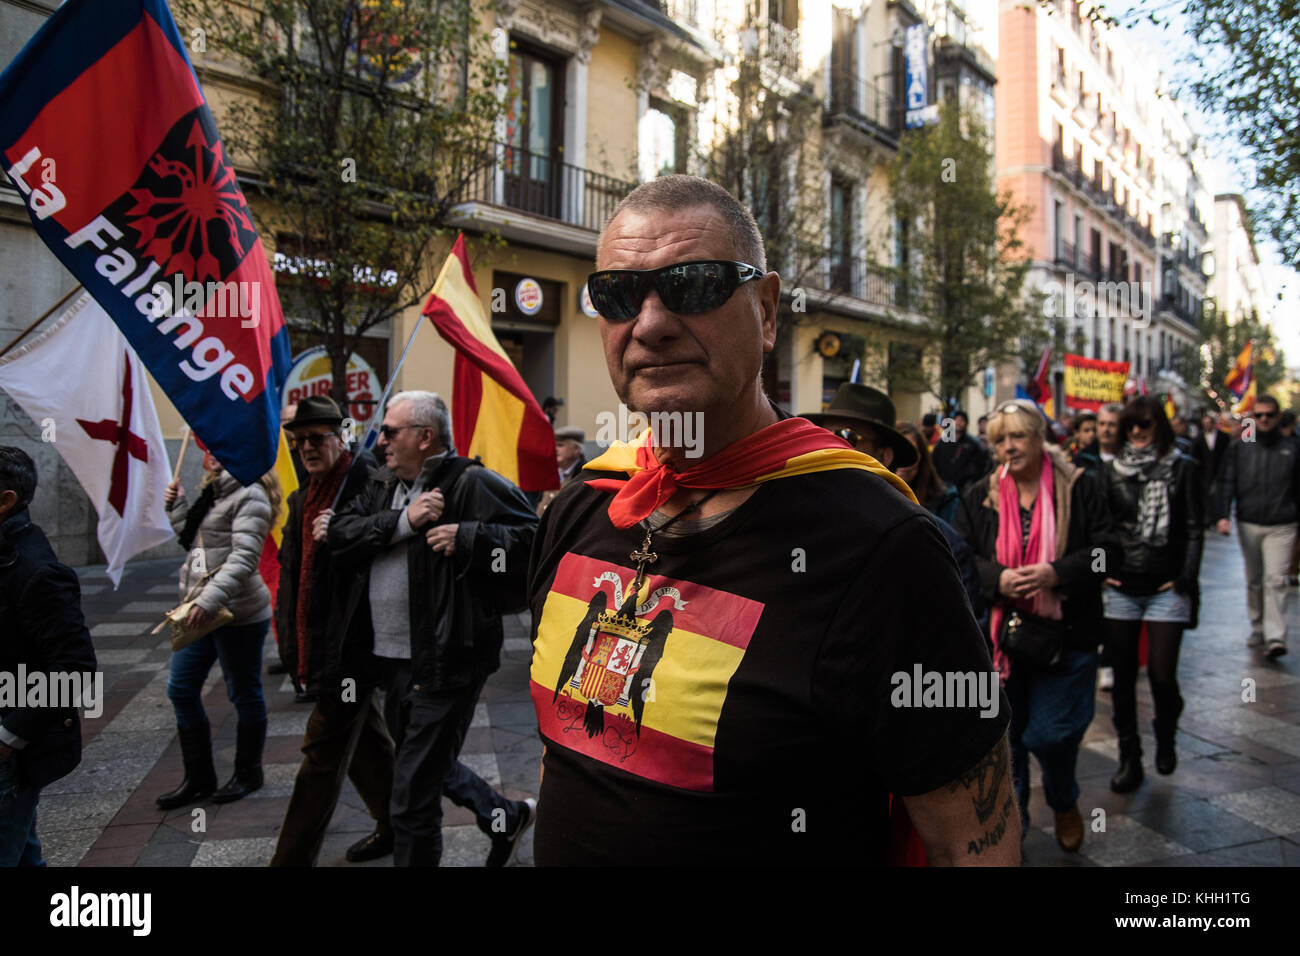 Madrid, Spain. 19th Nov, 2017. A supporter of Franco with a fascist flag marching during a rally commemorating the 42nd anniversary of dictator Francisco Franco's death, in Madrid, Spain. Credit: Marcos del Mazo/Alamy Live News Stock Photo